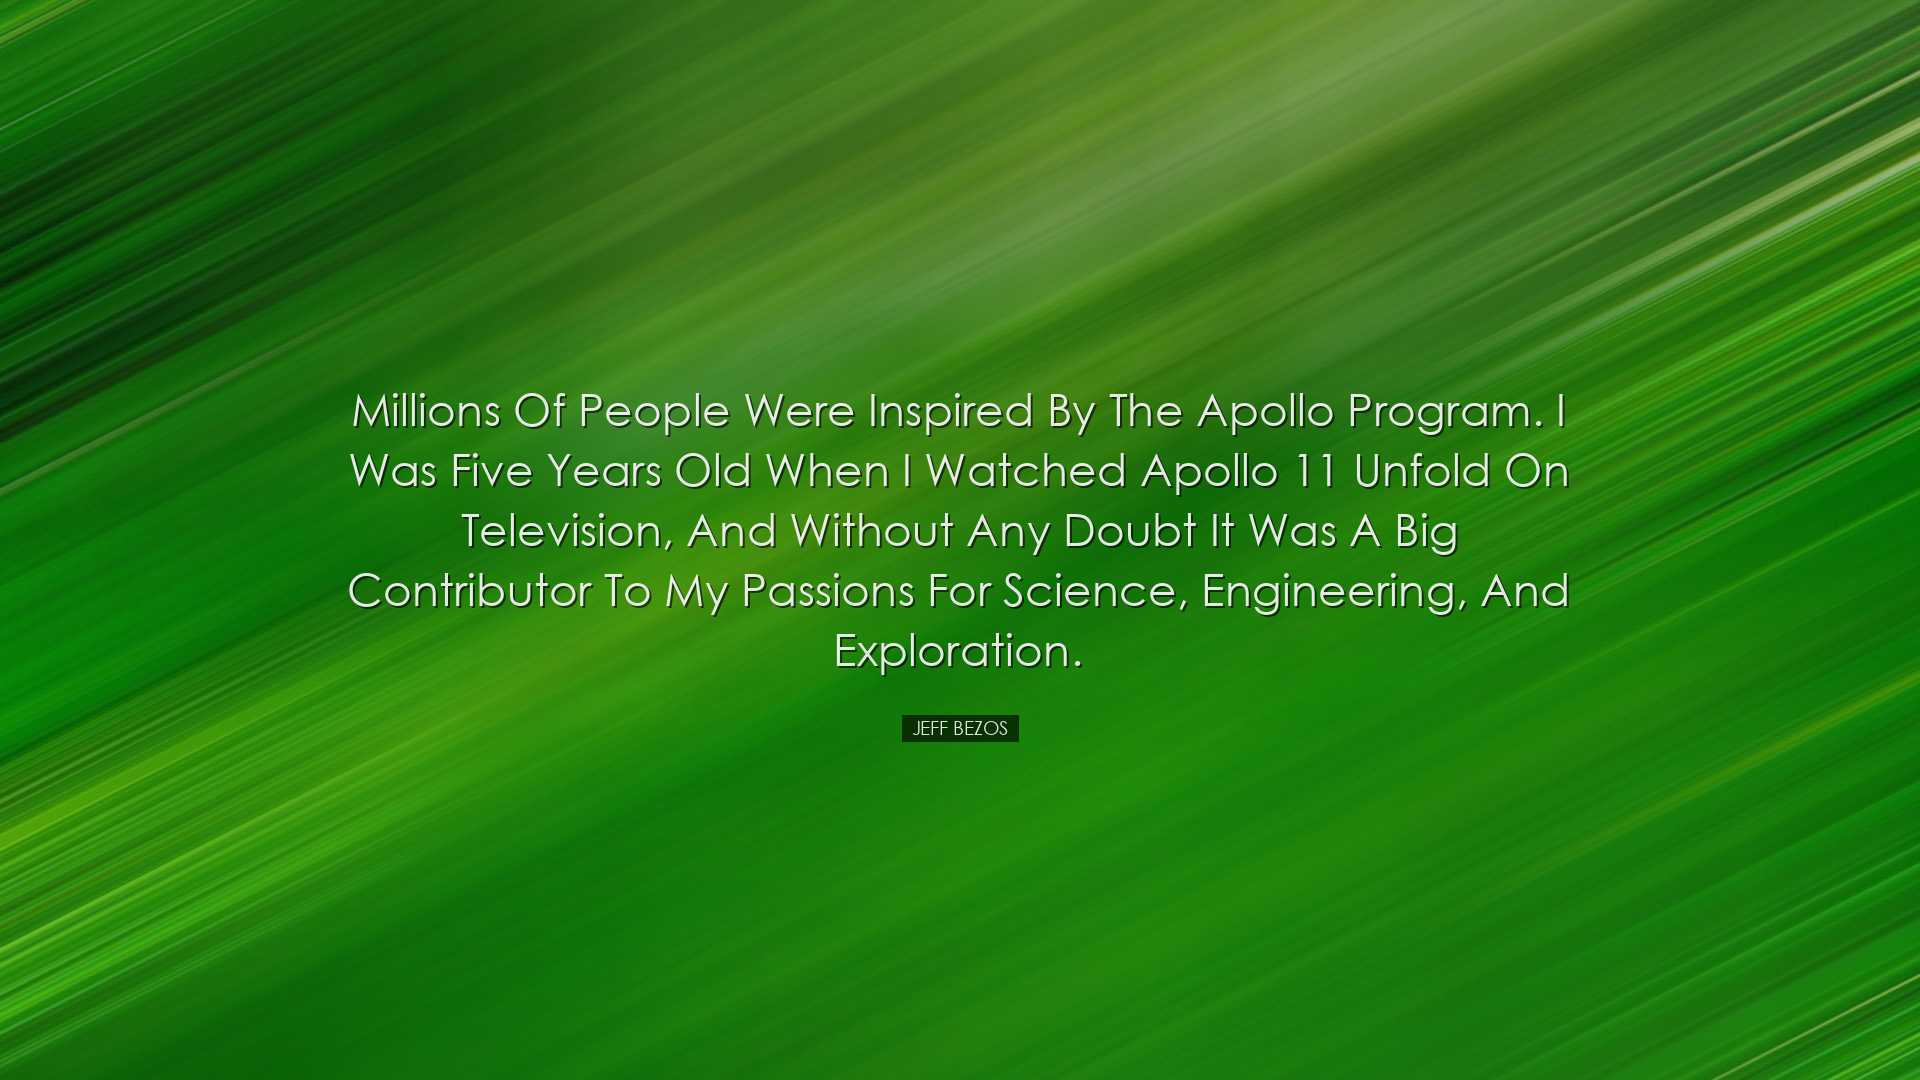 Millions of people were inspired by the Apollo Program. I was five